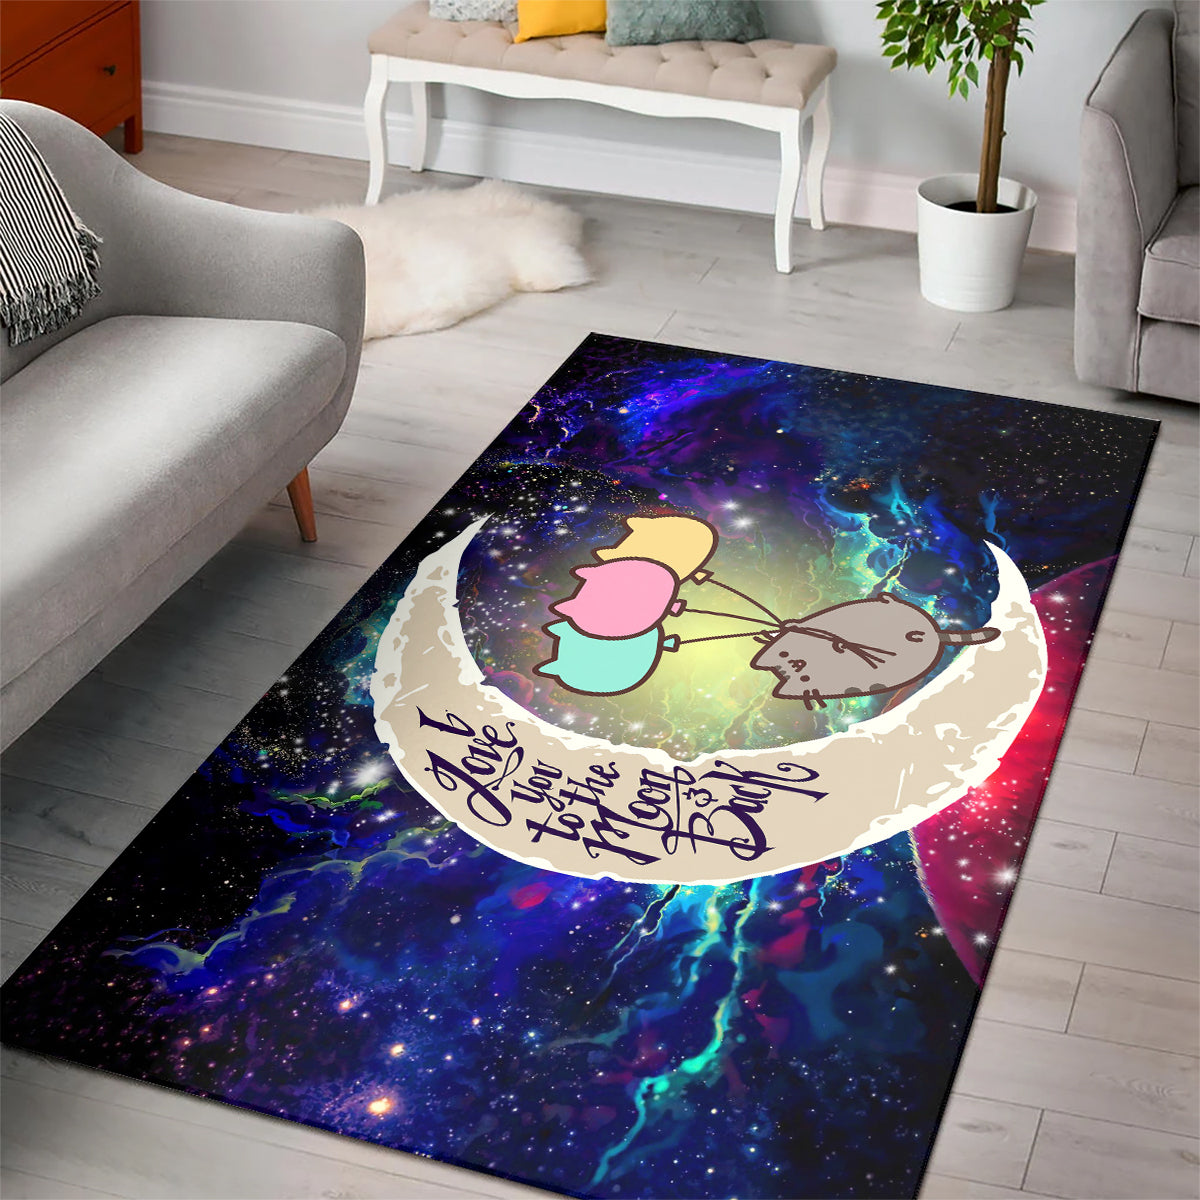 Pusheen Cat Love You To The Moon Galaxy Carpet Rug Home Room Decor